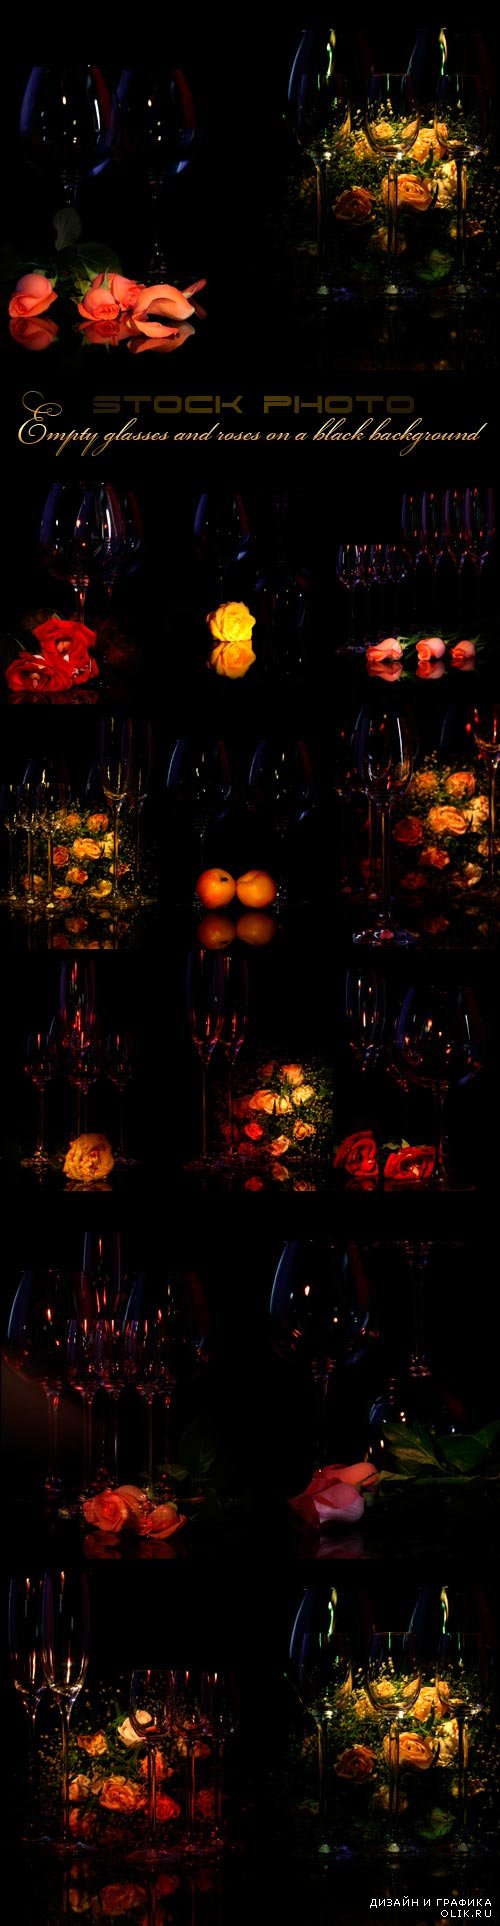 Empty glasses and roses on a black background